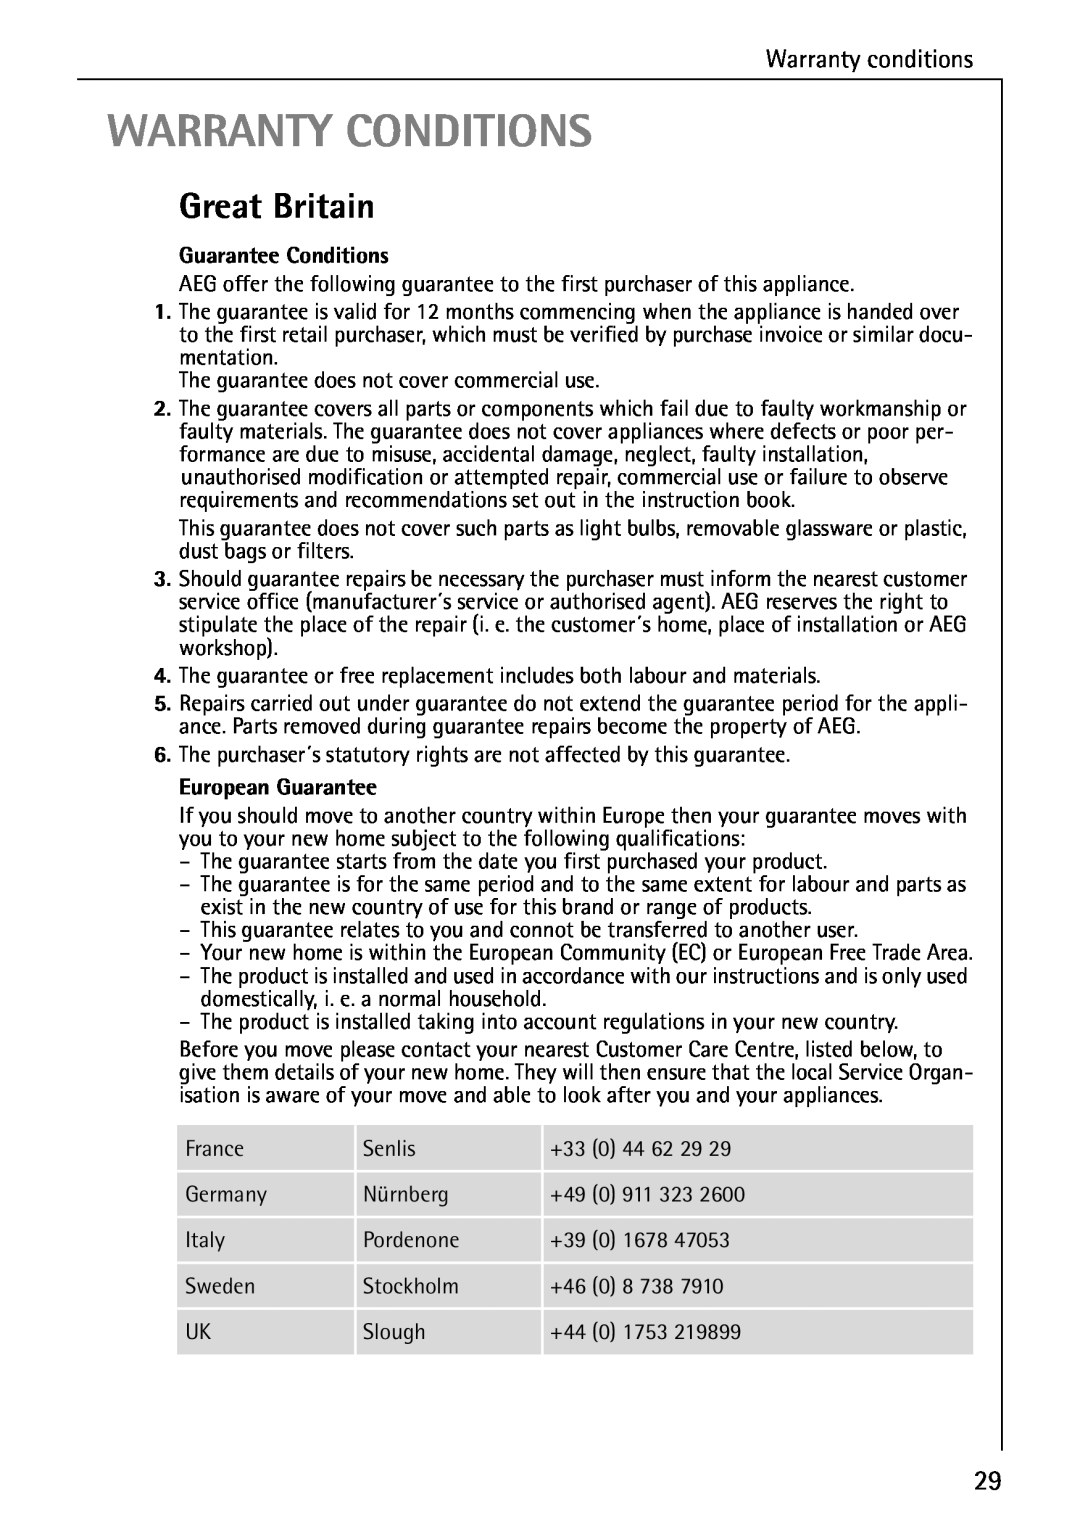 Electrolux C65030K operating instructions Warranty Conditions, Great Britain, Guarantee Conditions, European Guarantee 